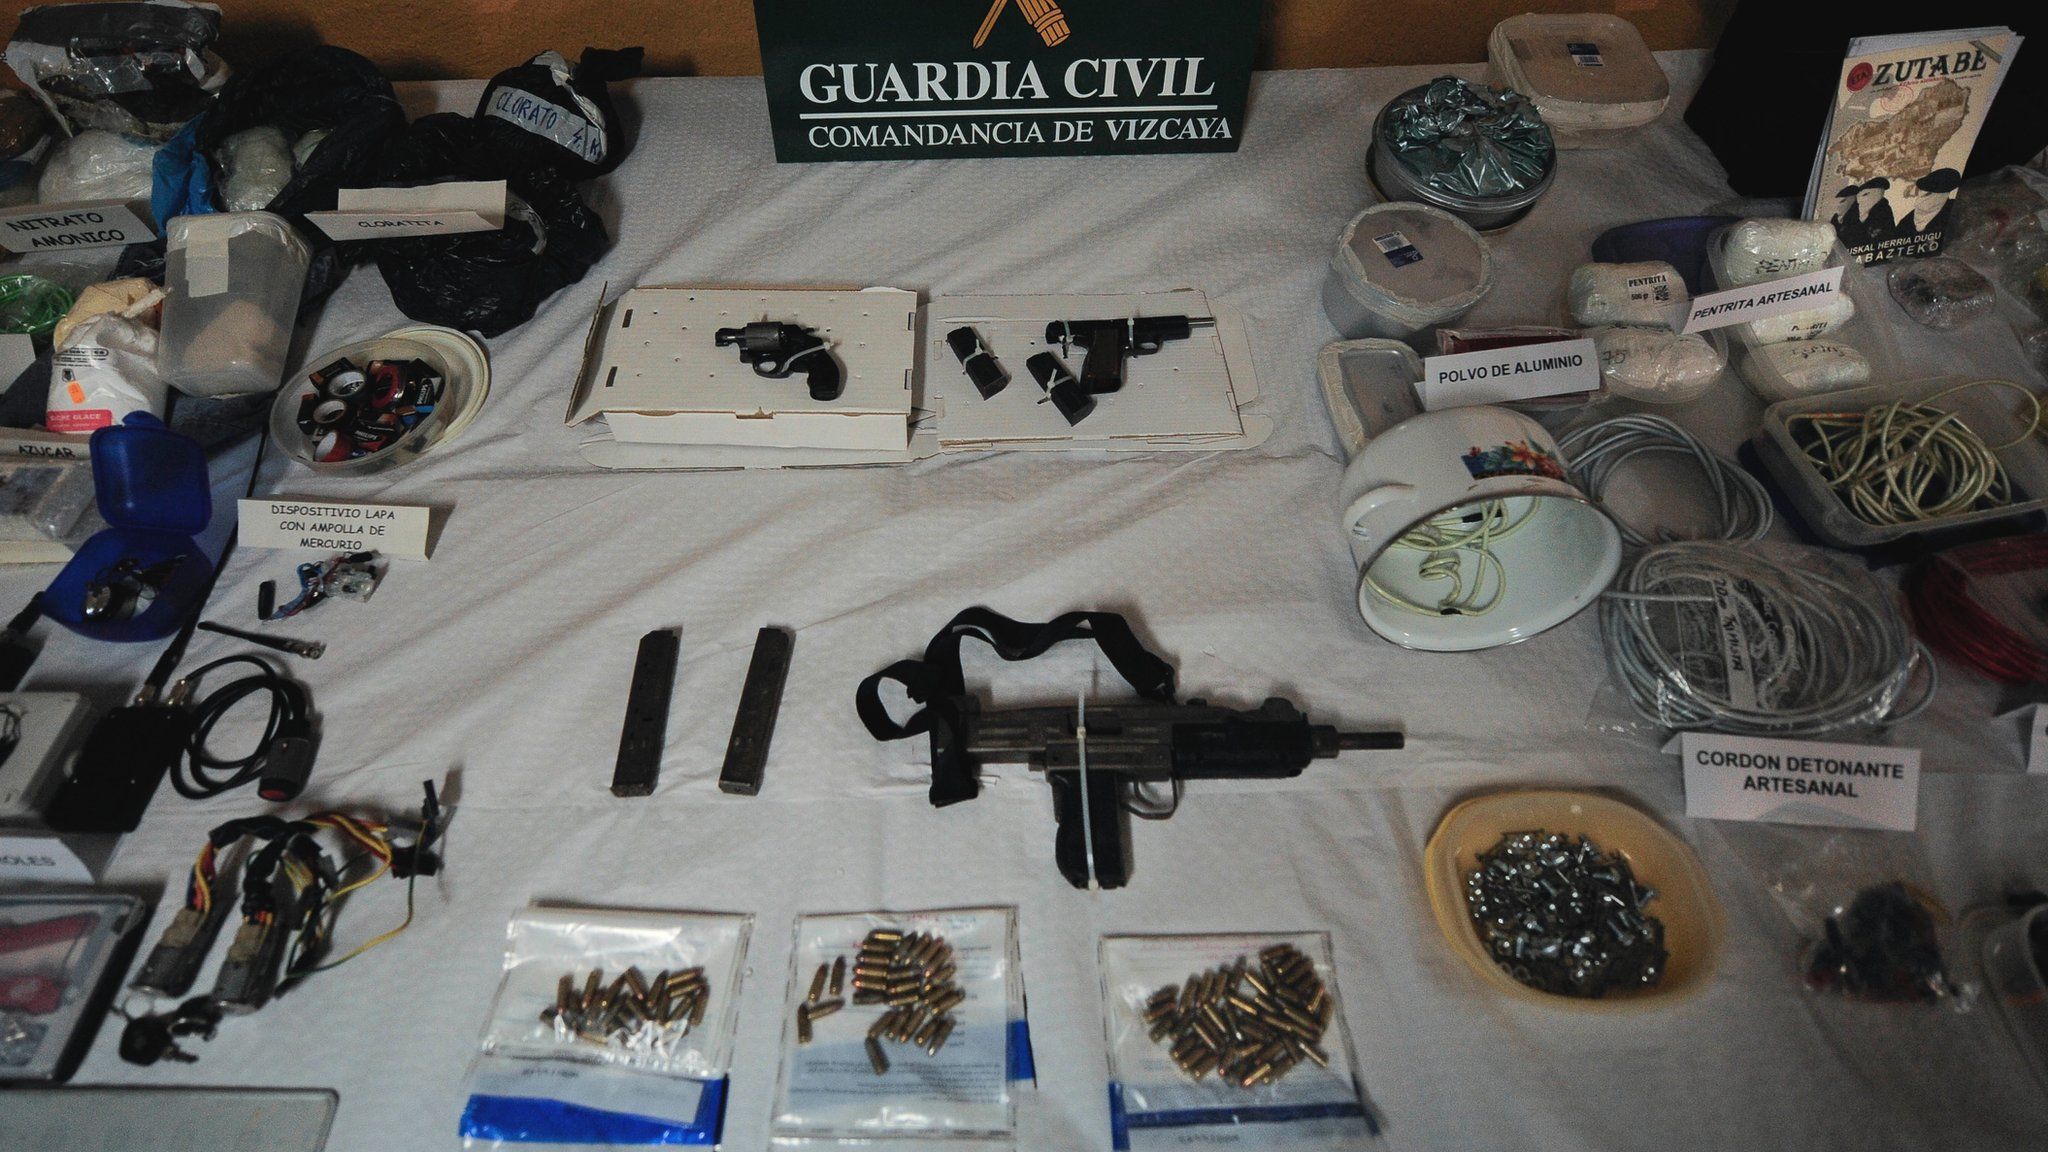 Munitions, weapons and 200 kilograms of explosives captured from the Basque separatist group Eta by the Civil Guard are displayed in Bilbao, northern Spain, on 11 March 2011